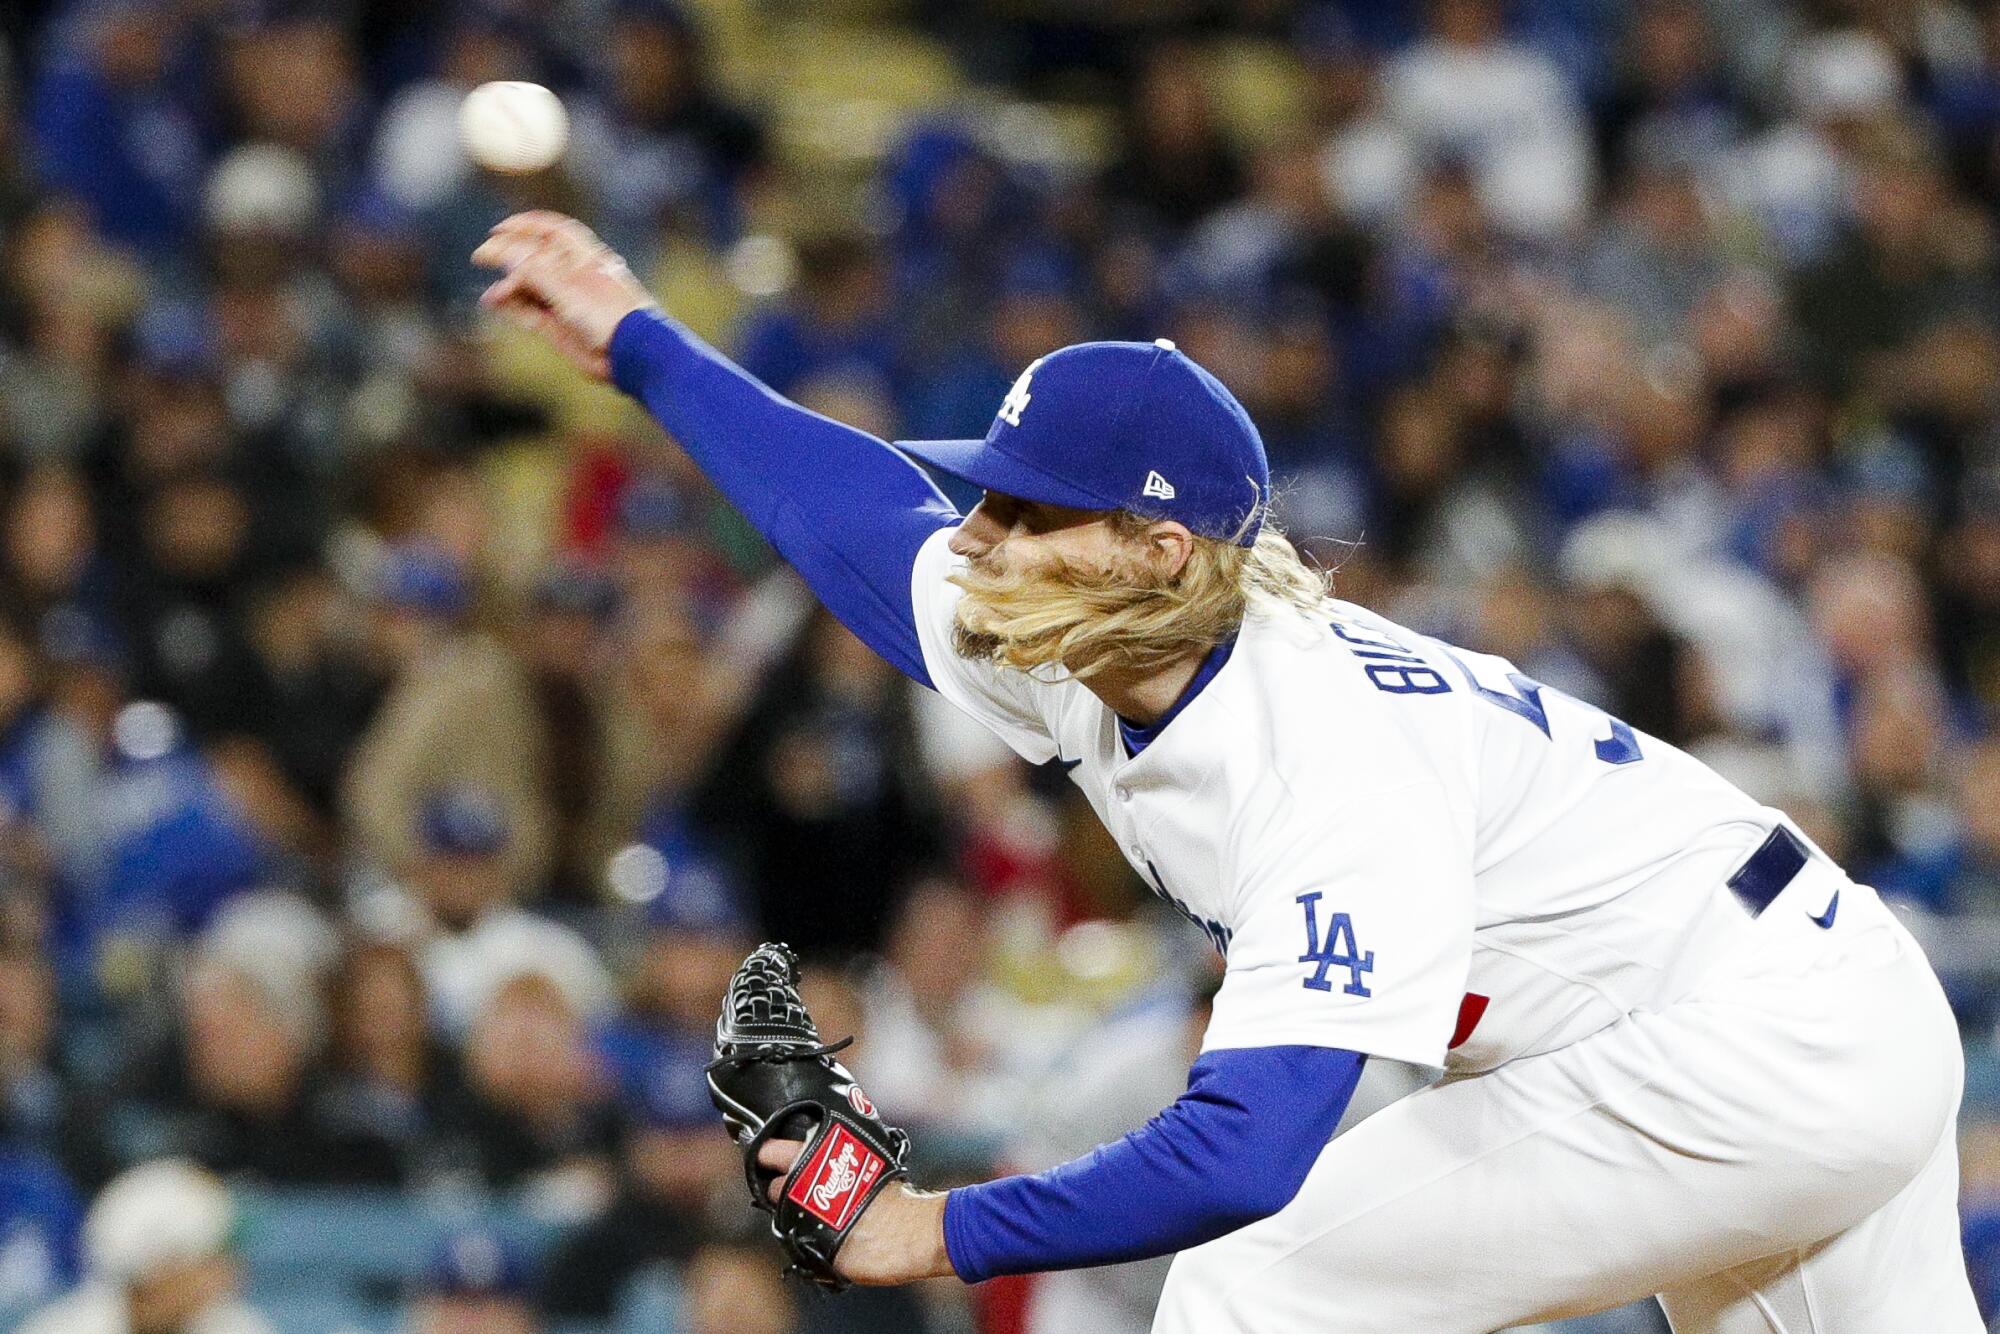 Dodgers relief pitcher Phil Bickford delivers during the seventh inning against the Arizona Diamondbacks.